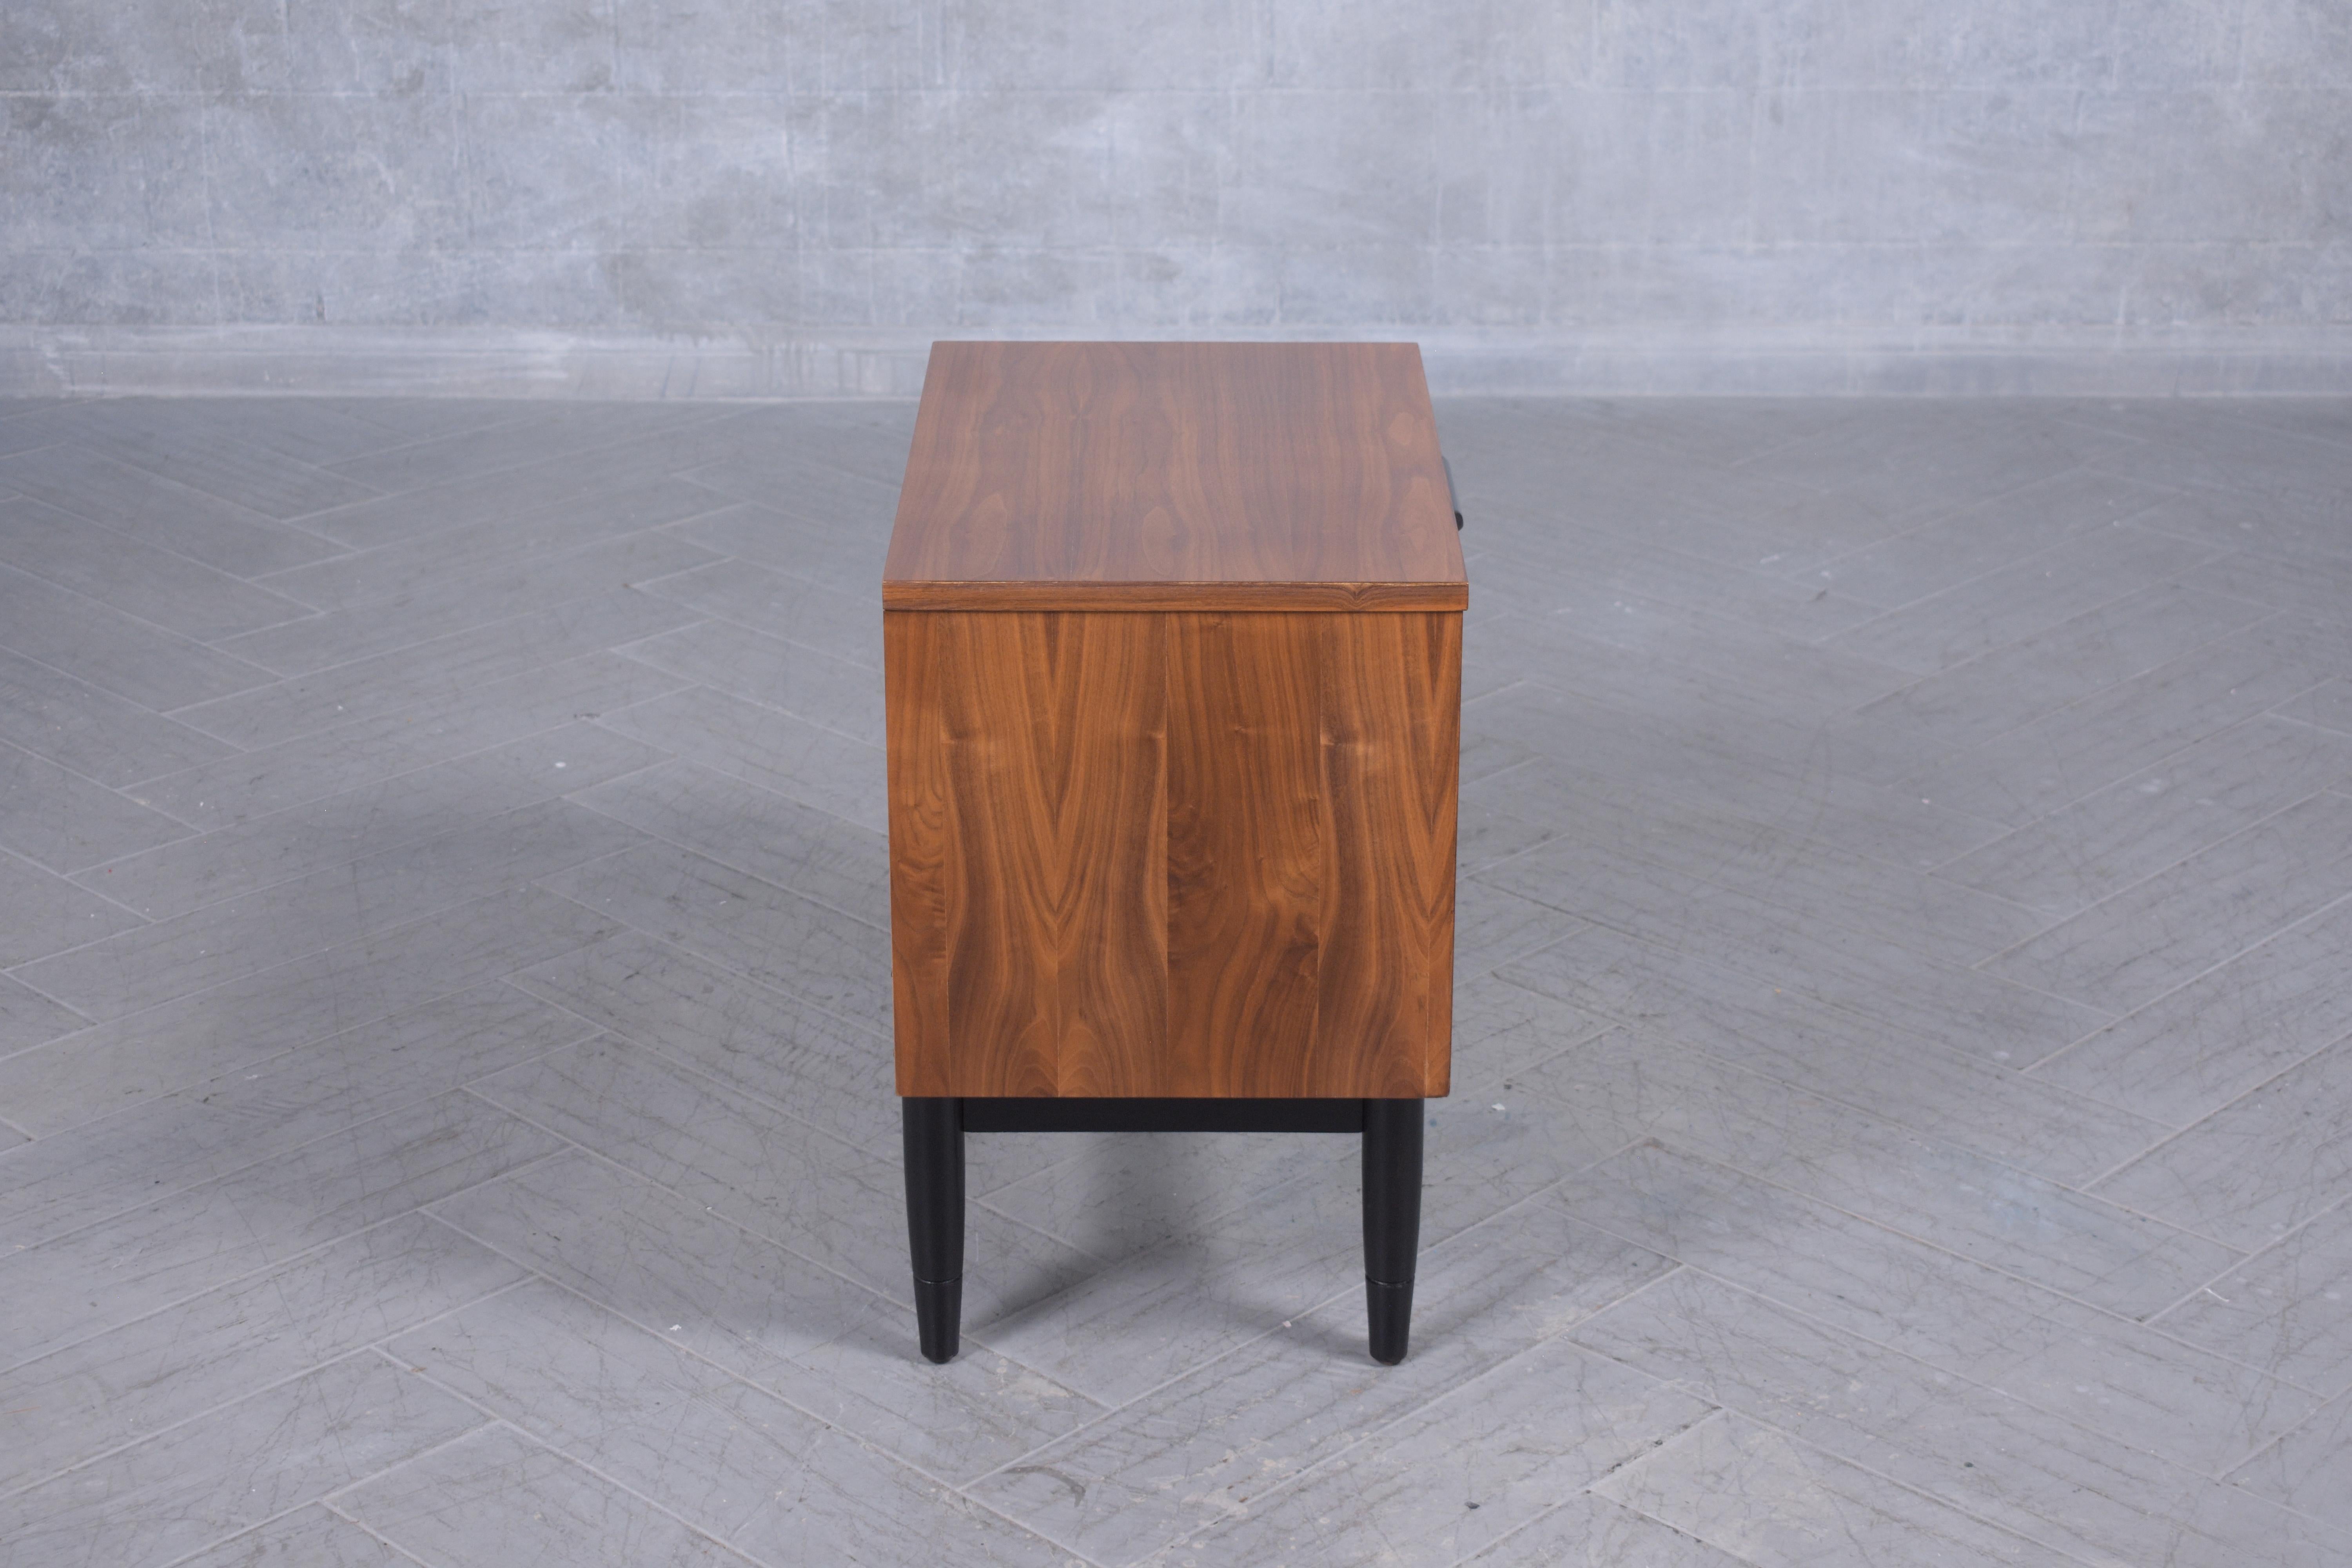 1960s Mid-Century Modern Walnut Nightstand: Ebonized Finish with Carved Details For Sale 5